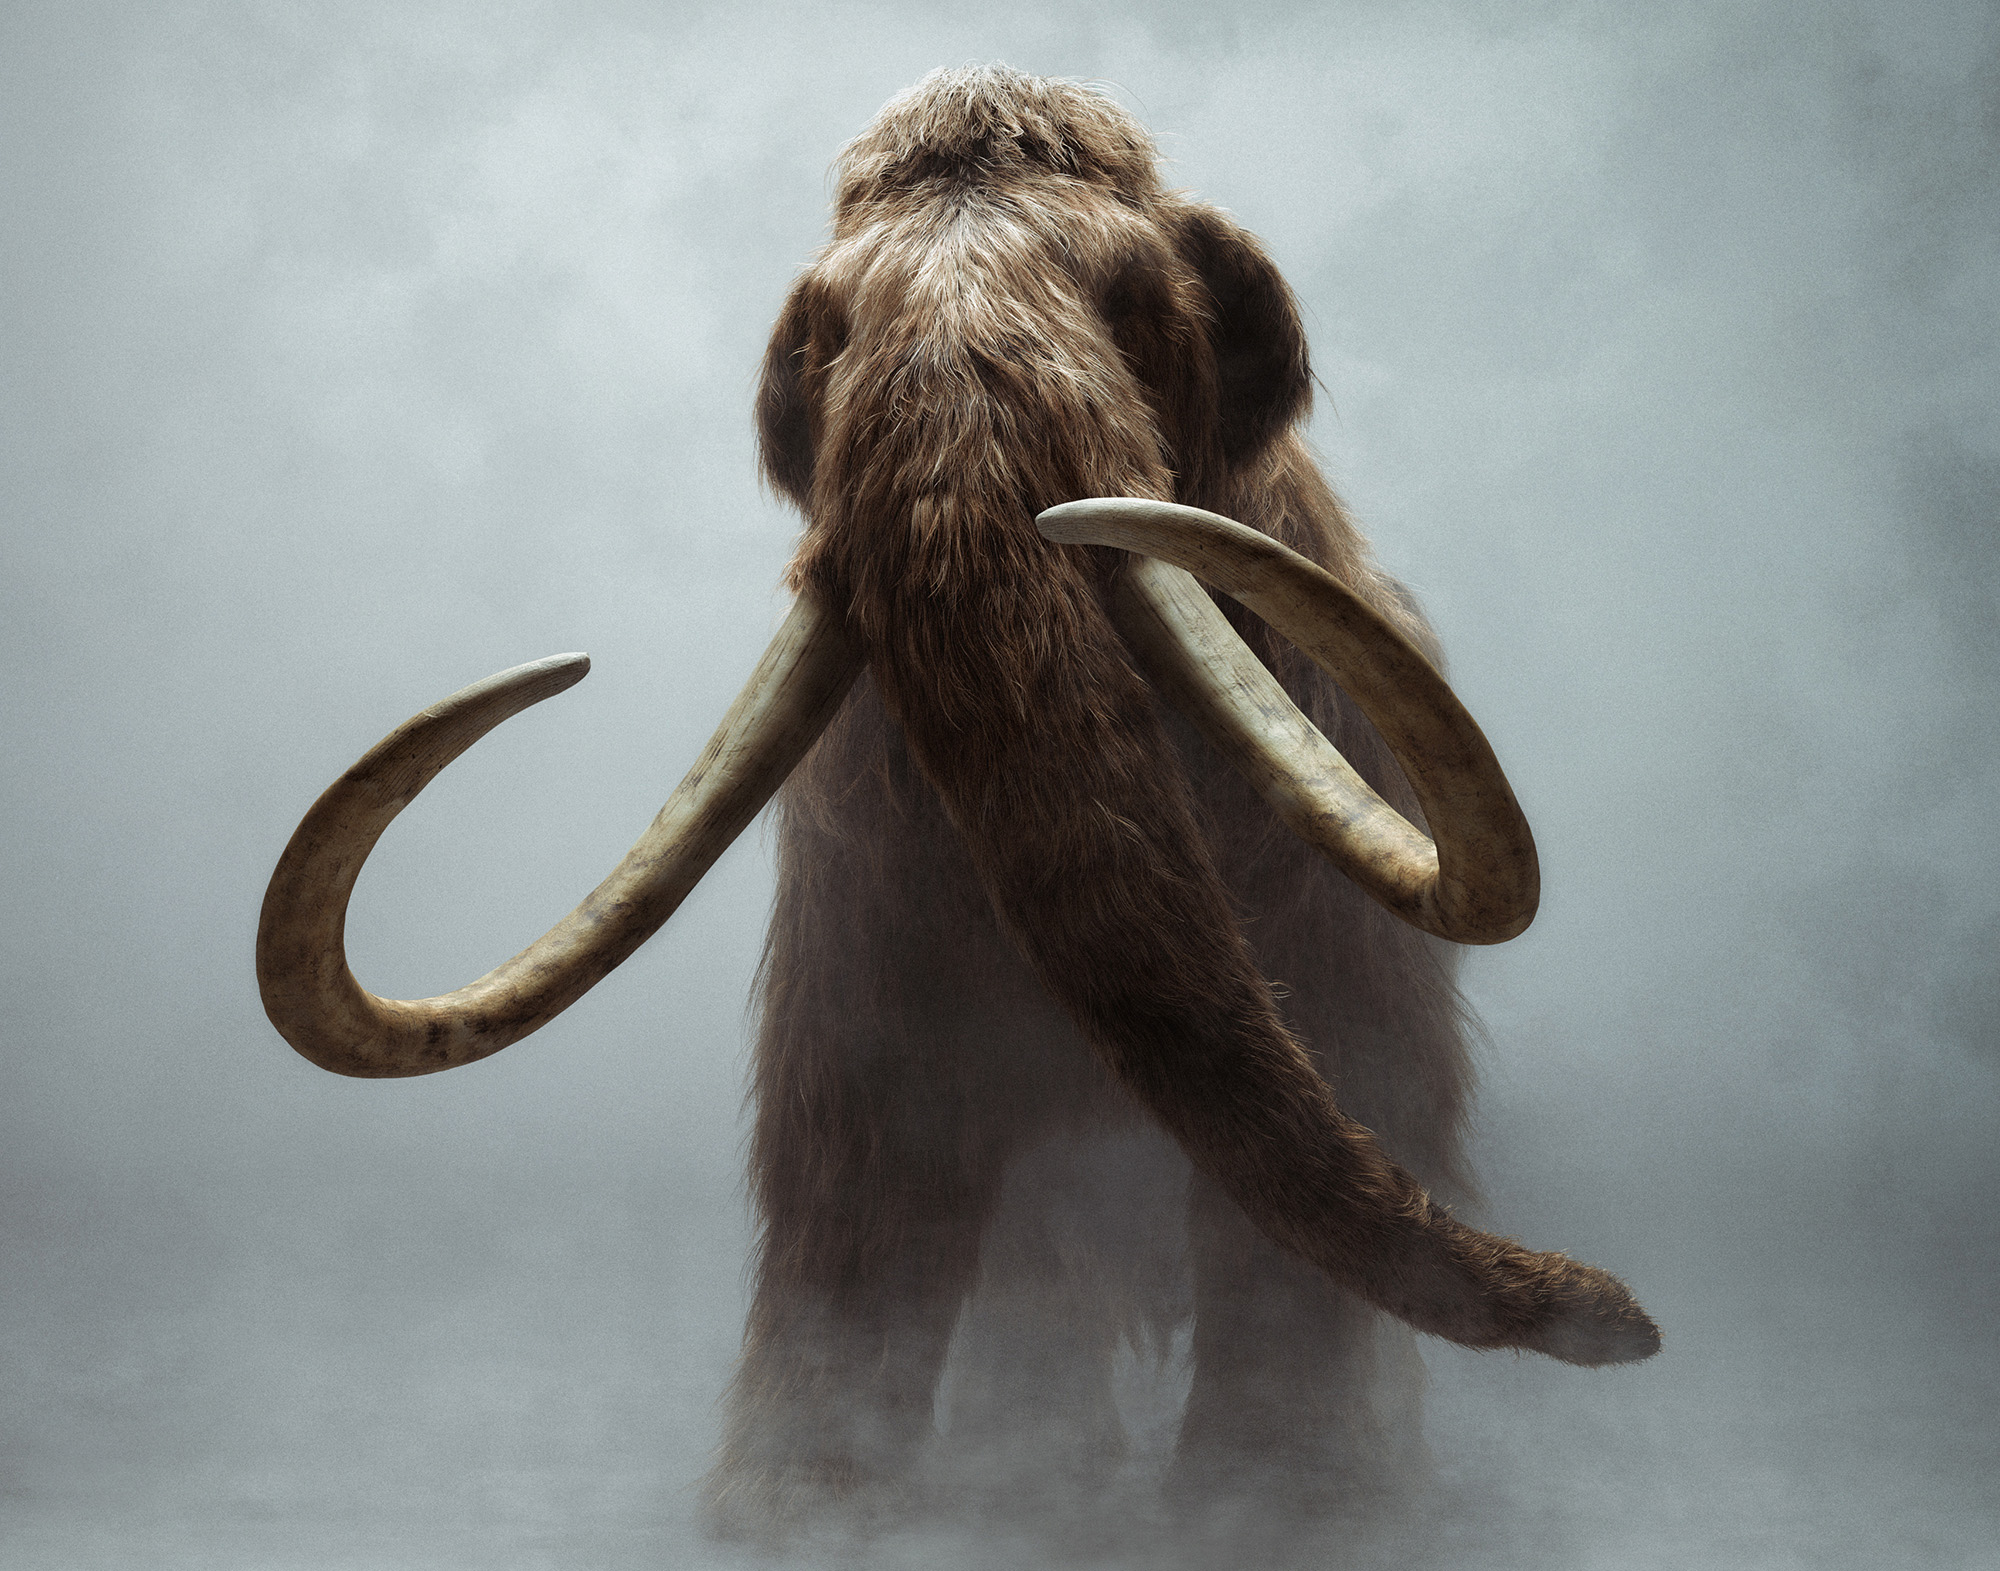 Woolly Mammoth Revival Raises $75 Million From VC Firms, Paris Hilton -  Bloomberg